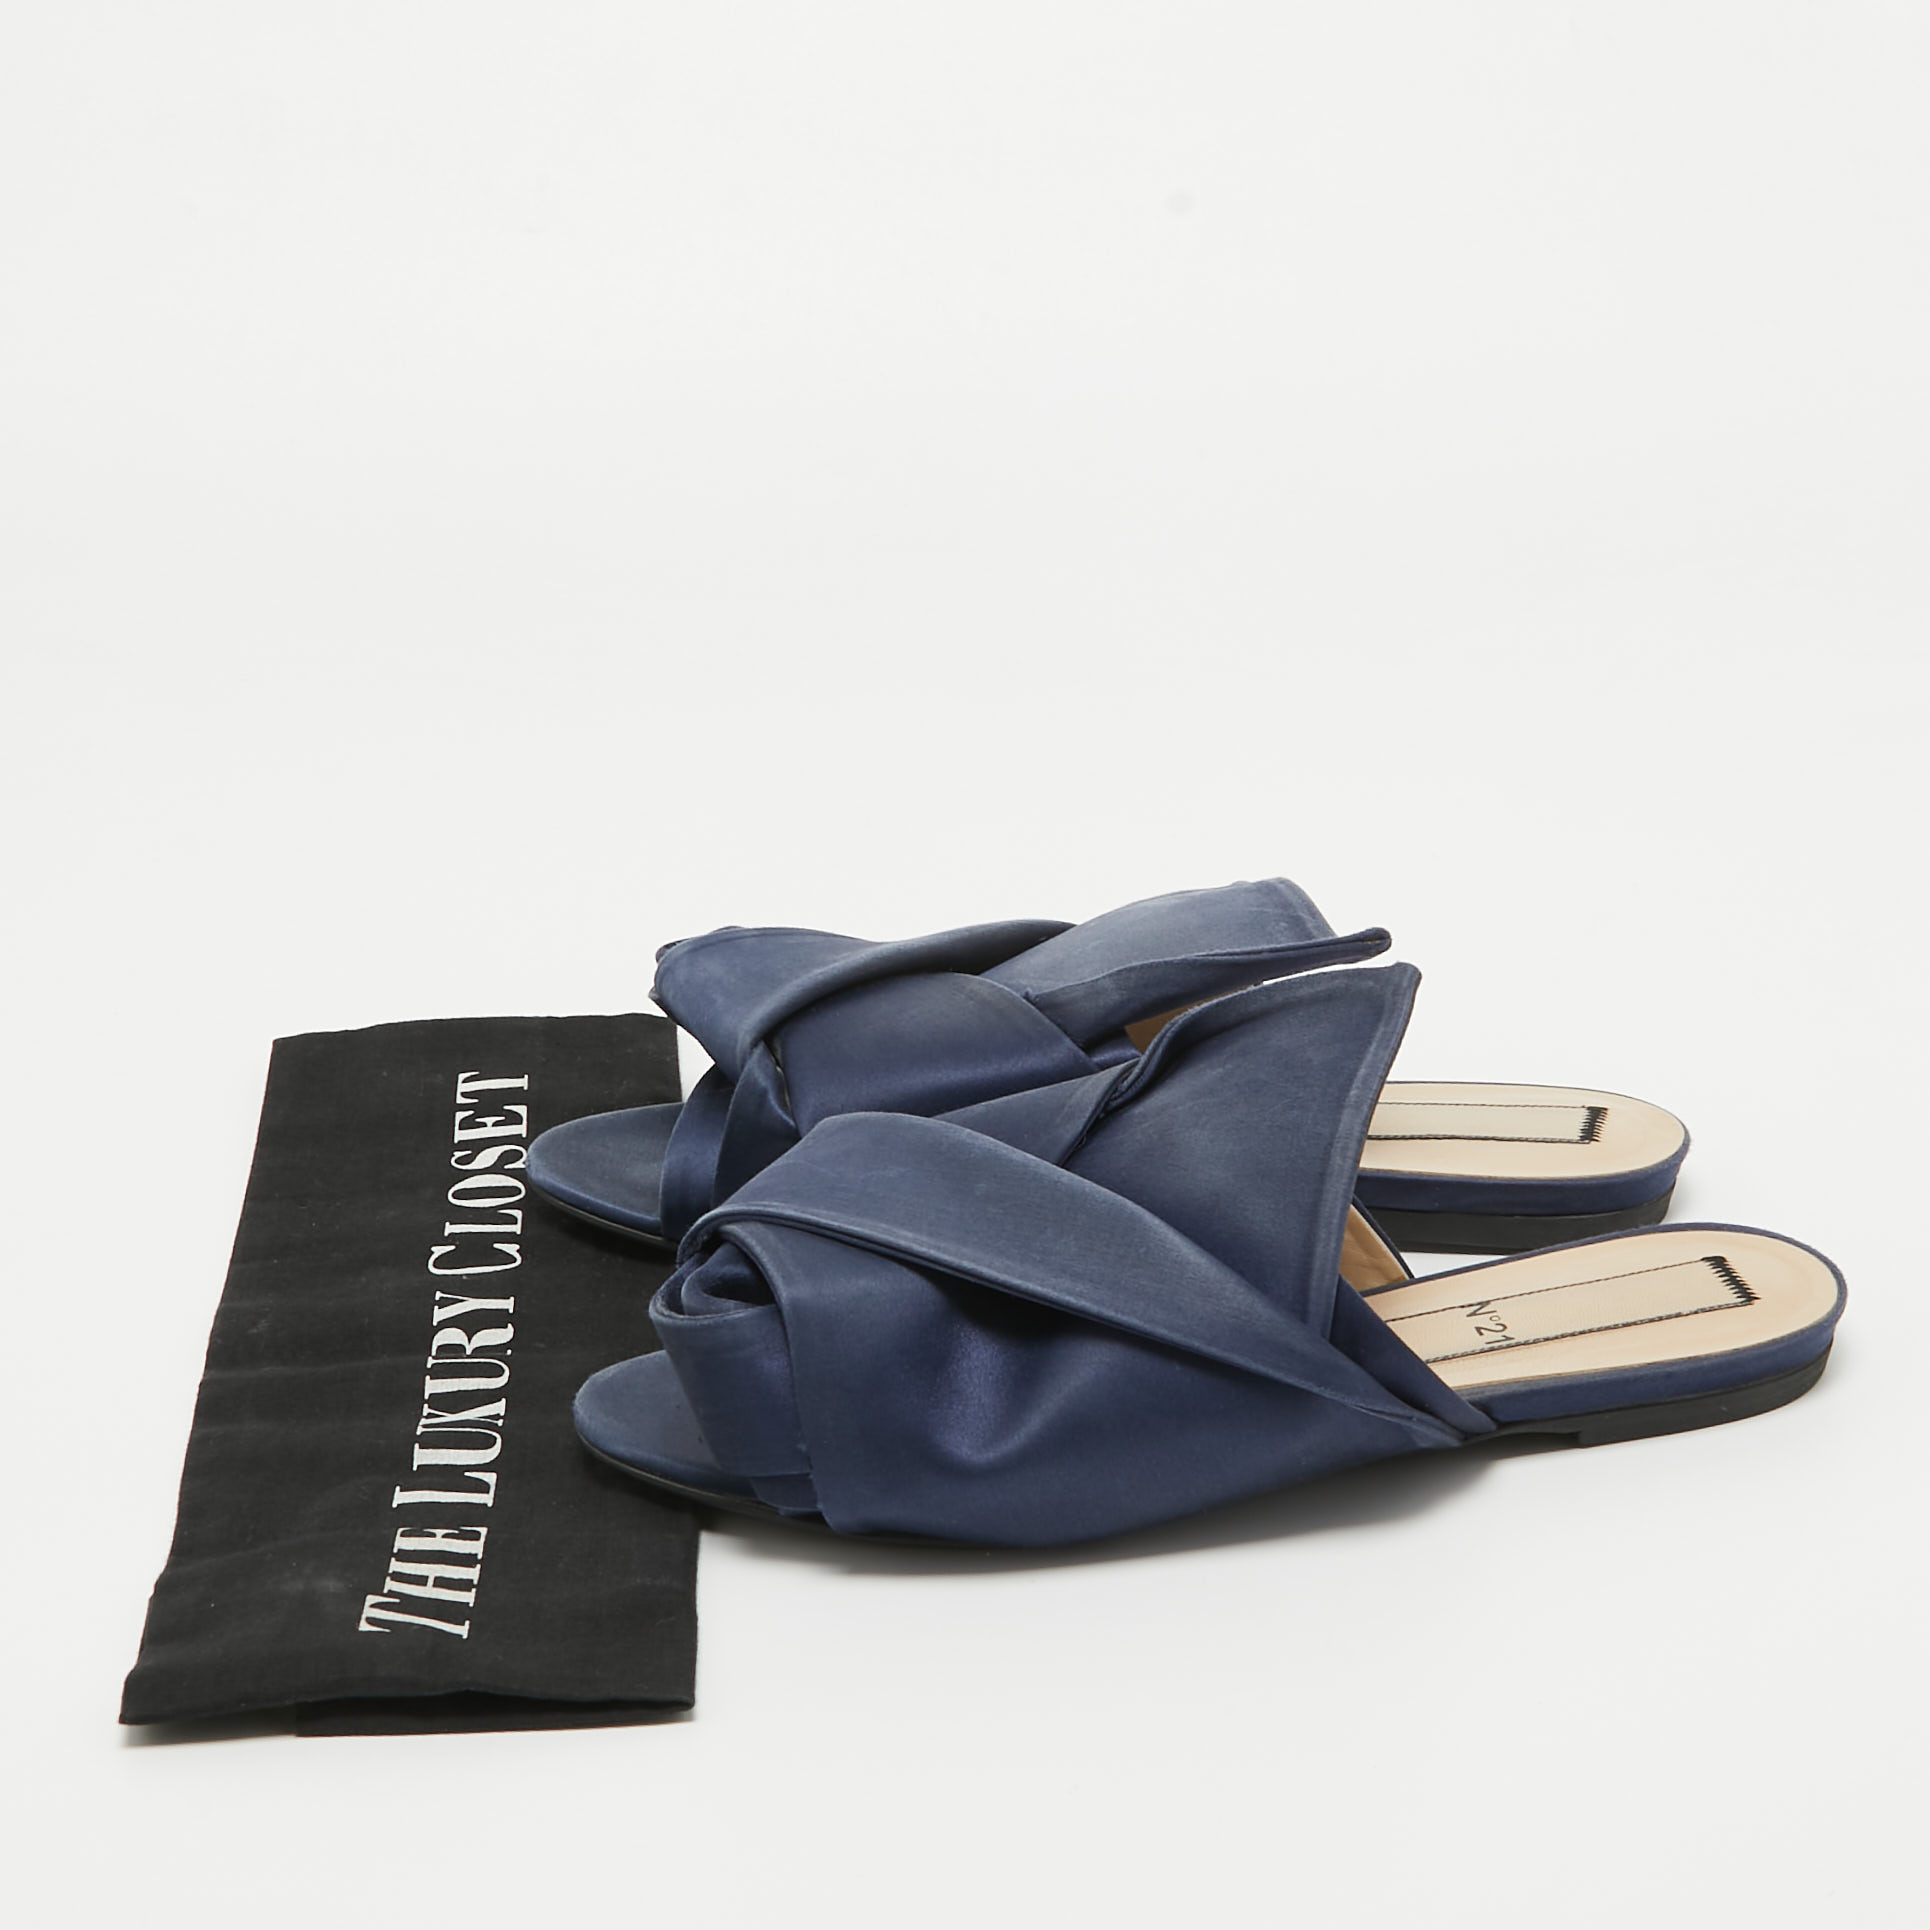 N21 Navy Blue Satin Knot Flat Mules Size 38.5